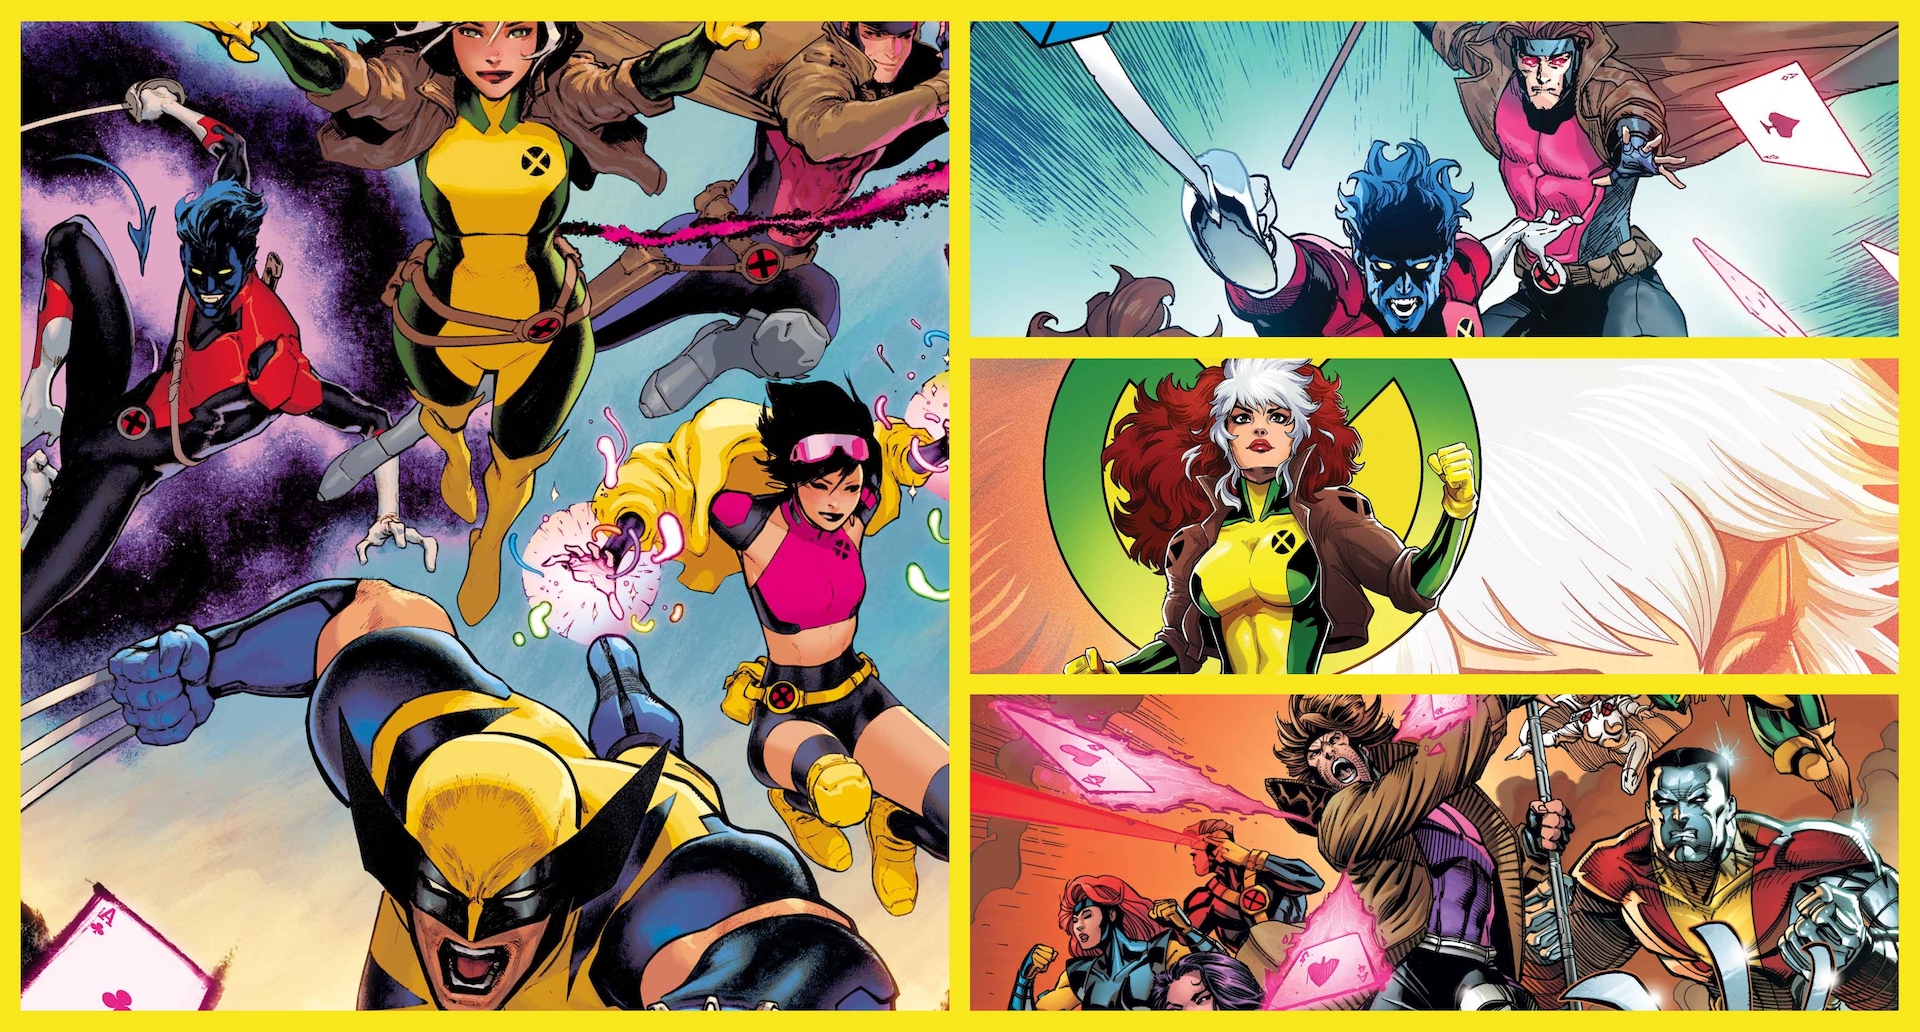 'Uncanny X-Men' #1 variant covers give new looks at Wolverine, Gambit and more